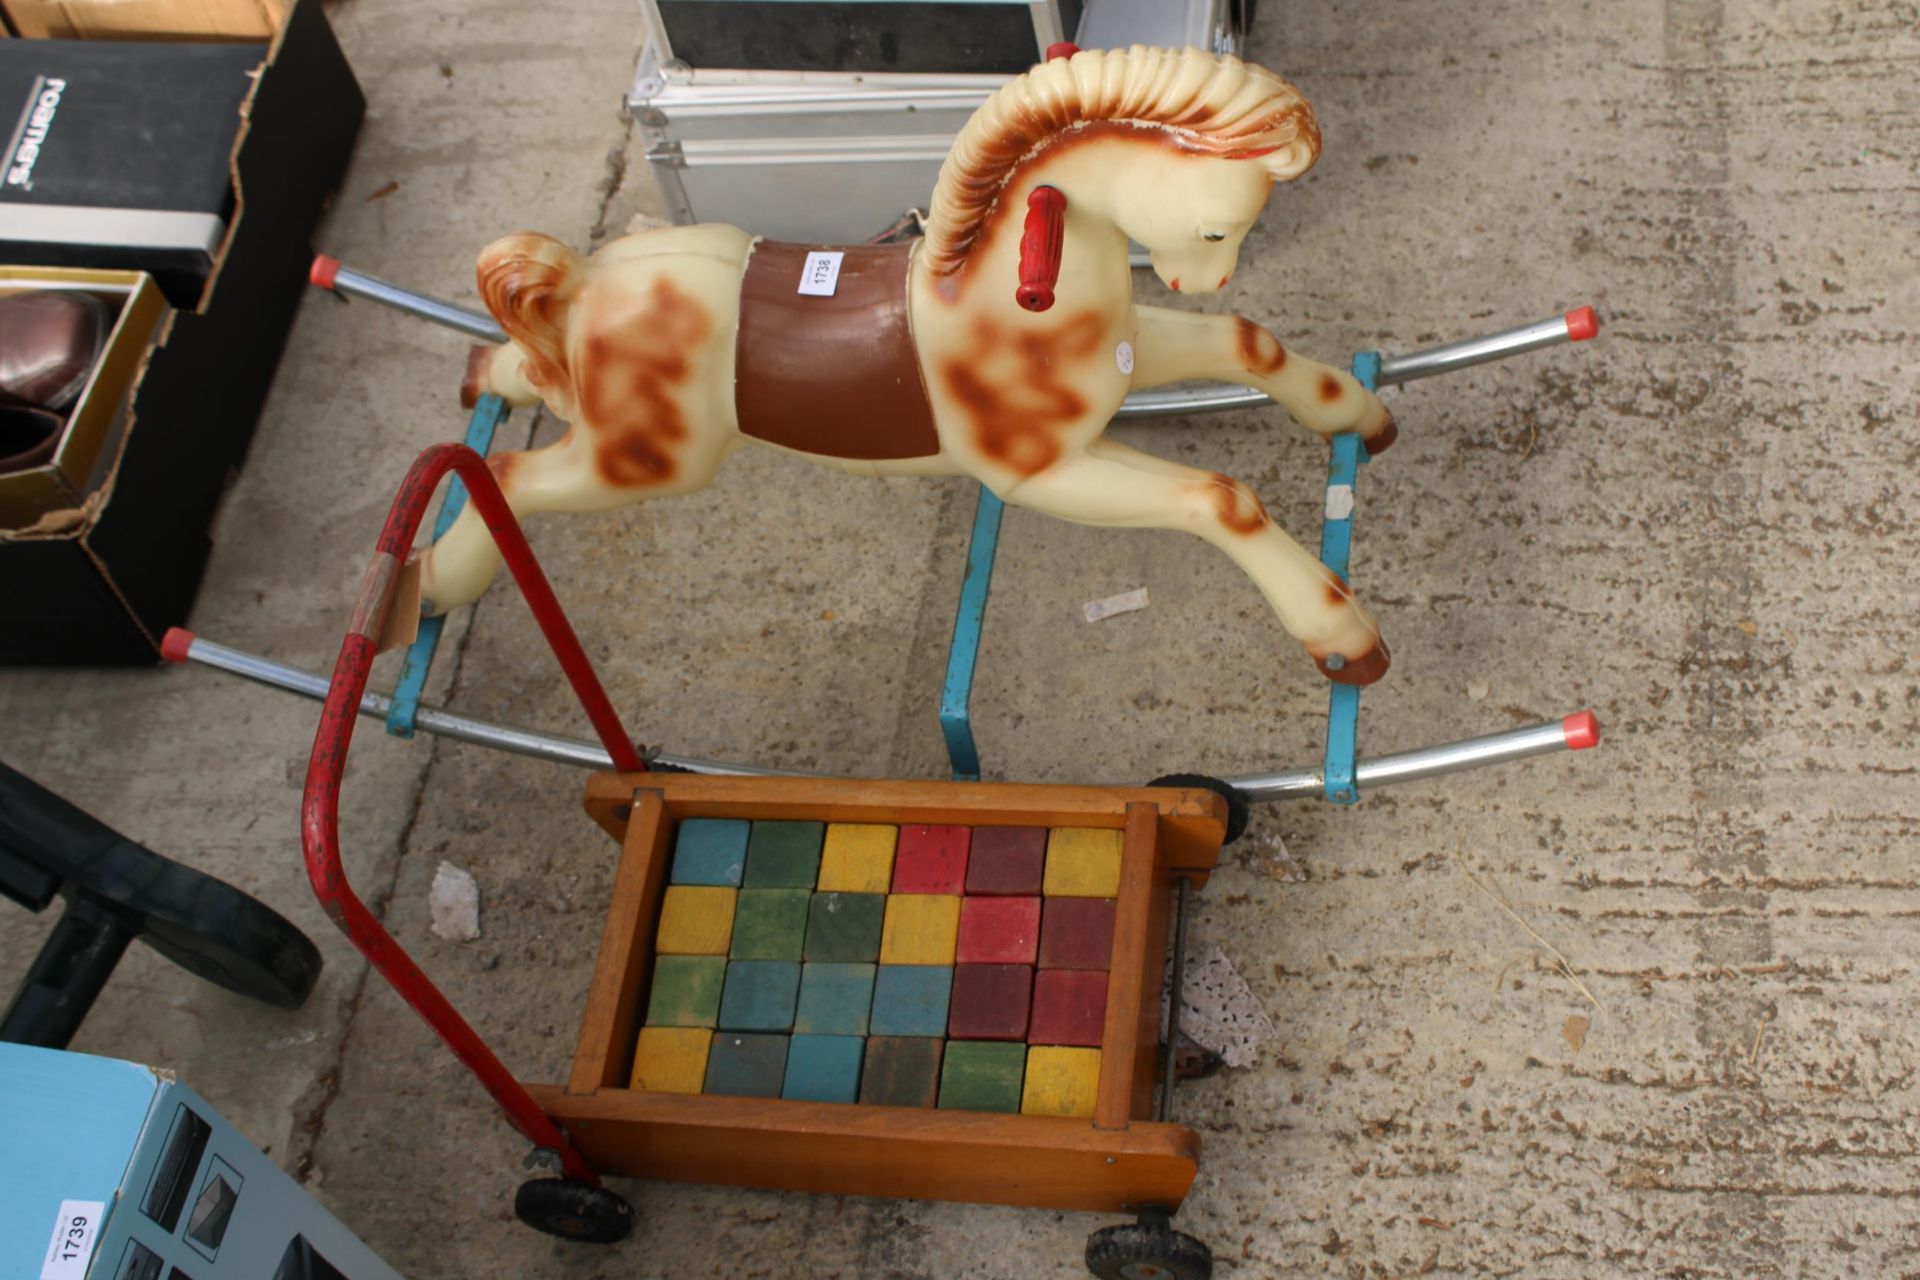 A SMALL CHILDS ROCKING HORSE AND A PUSH ALONG TROLLEY WITH WOODEN BLOCKS